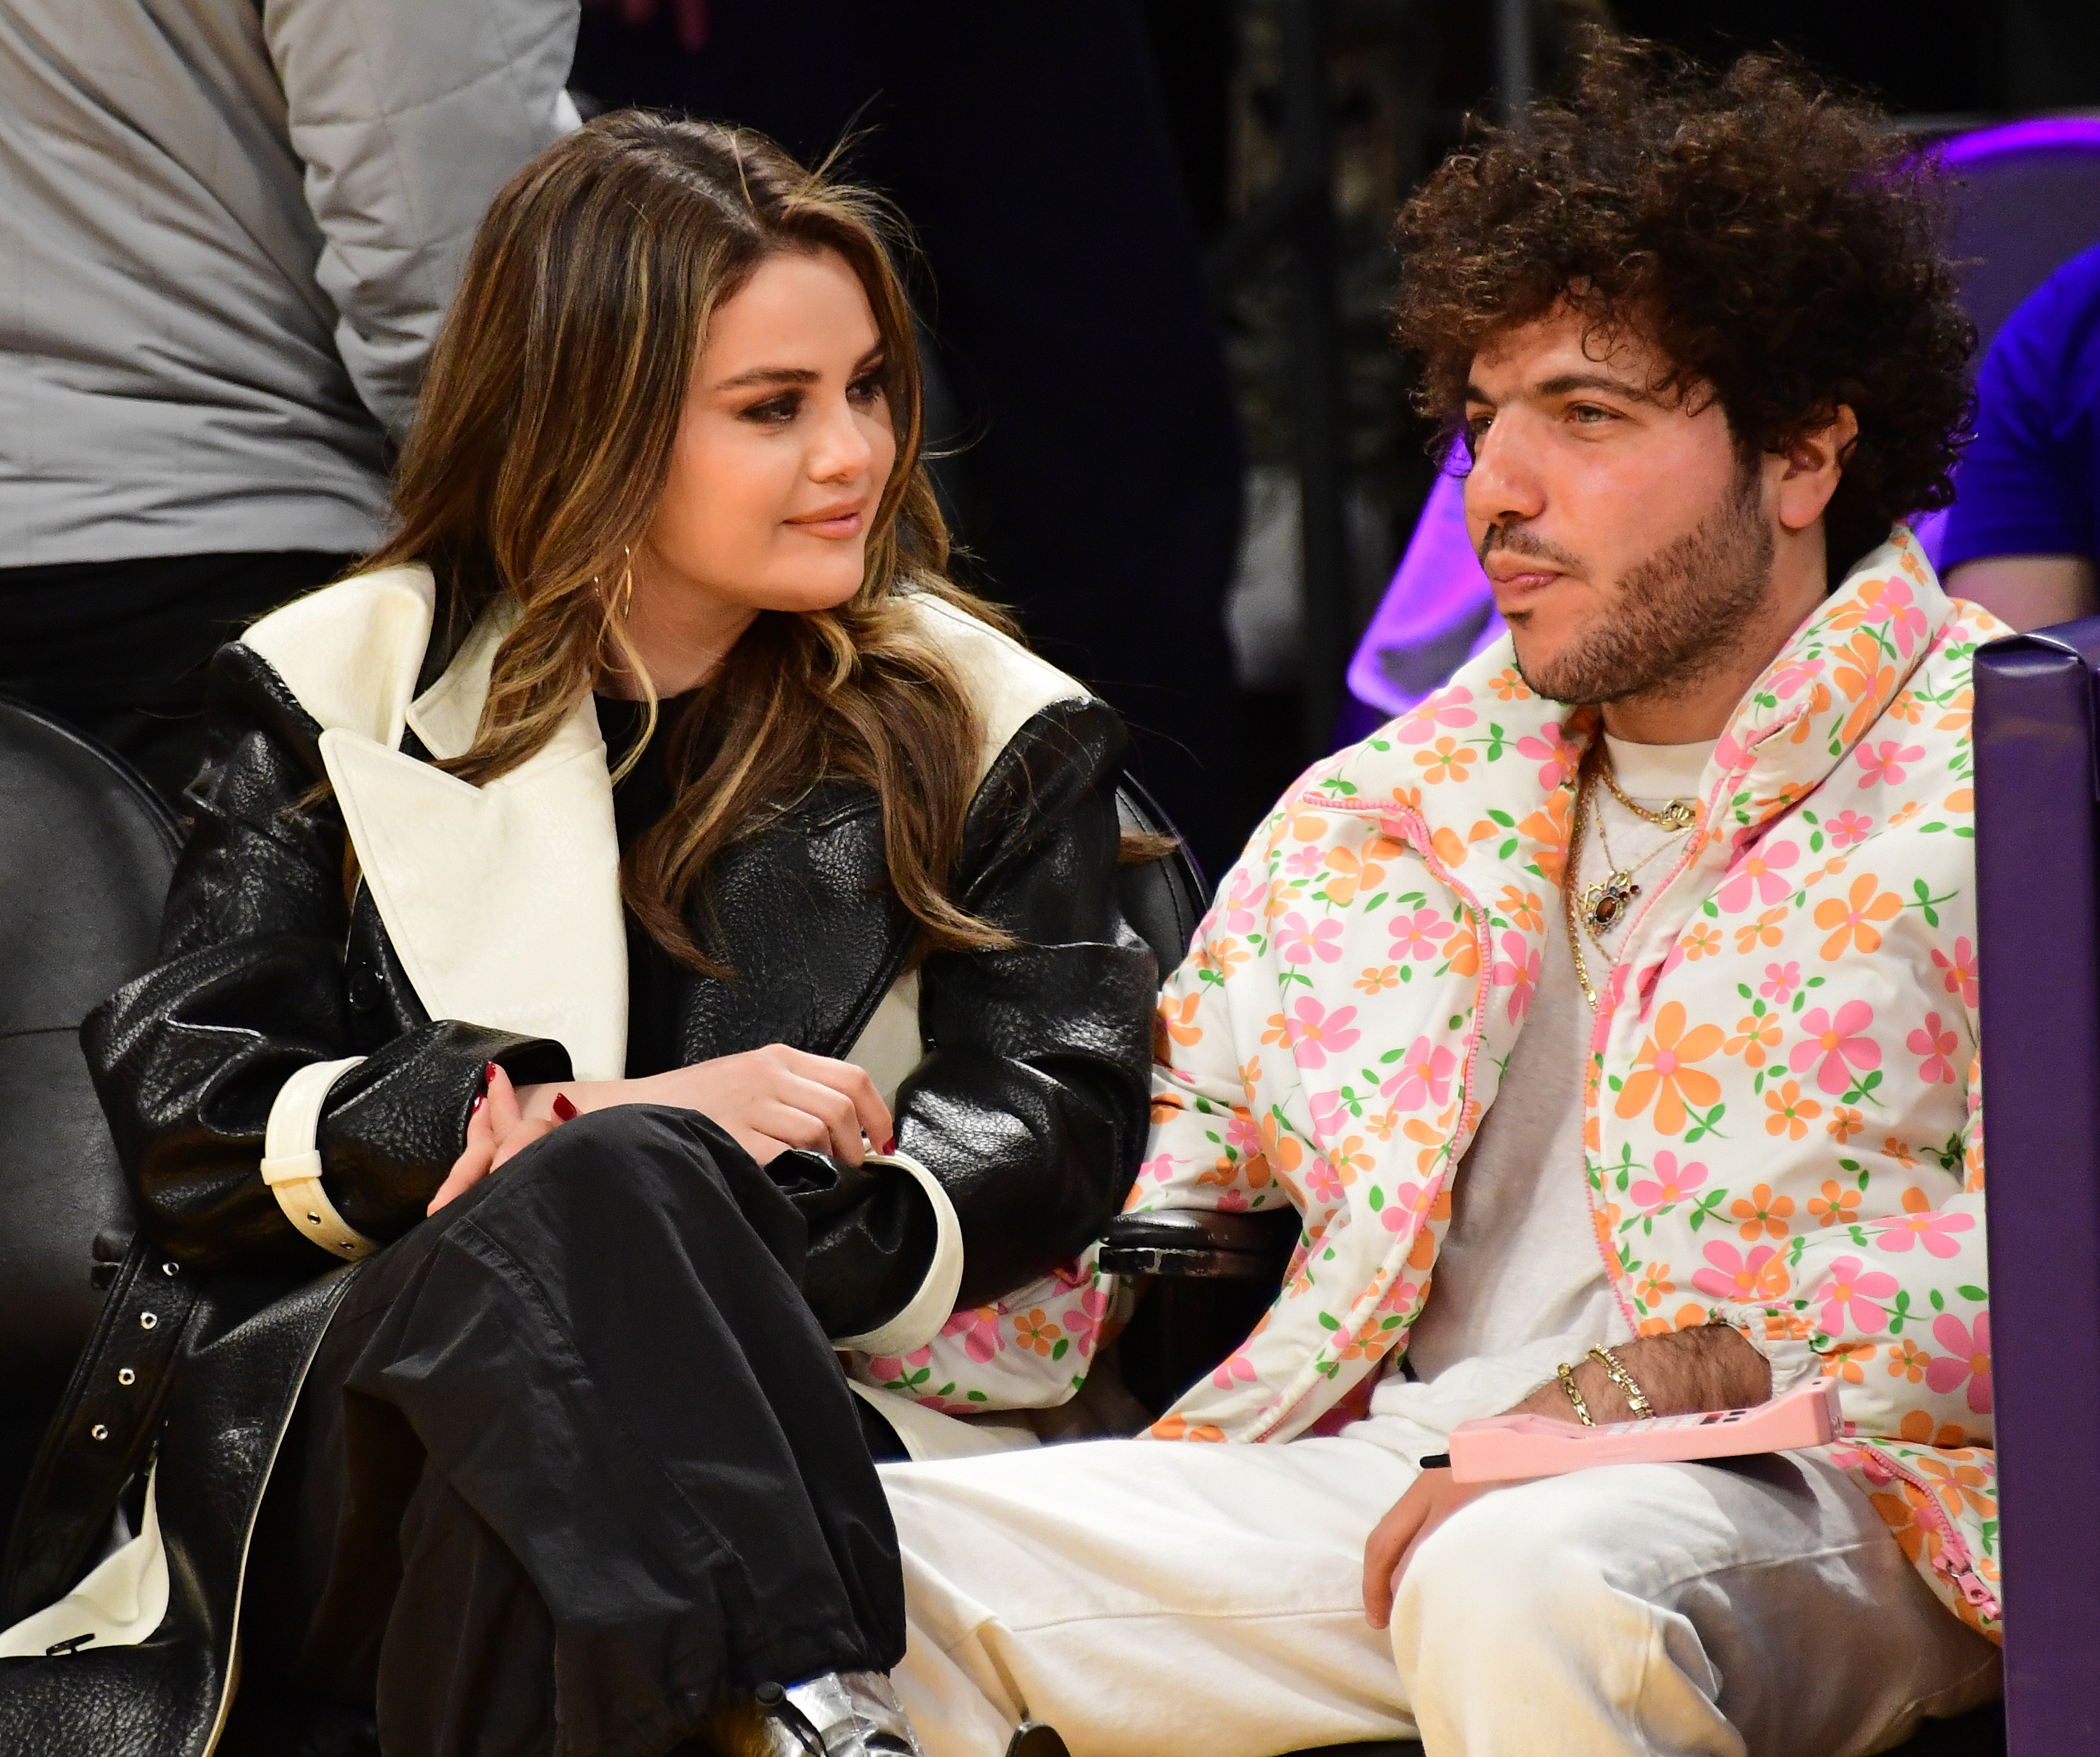 Selena Gomez and Benny Blanco pictured at a Lakers game in Los Angeles, California